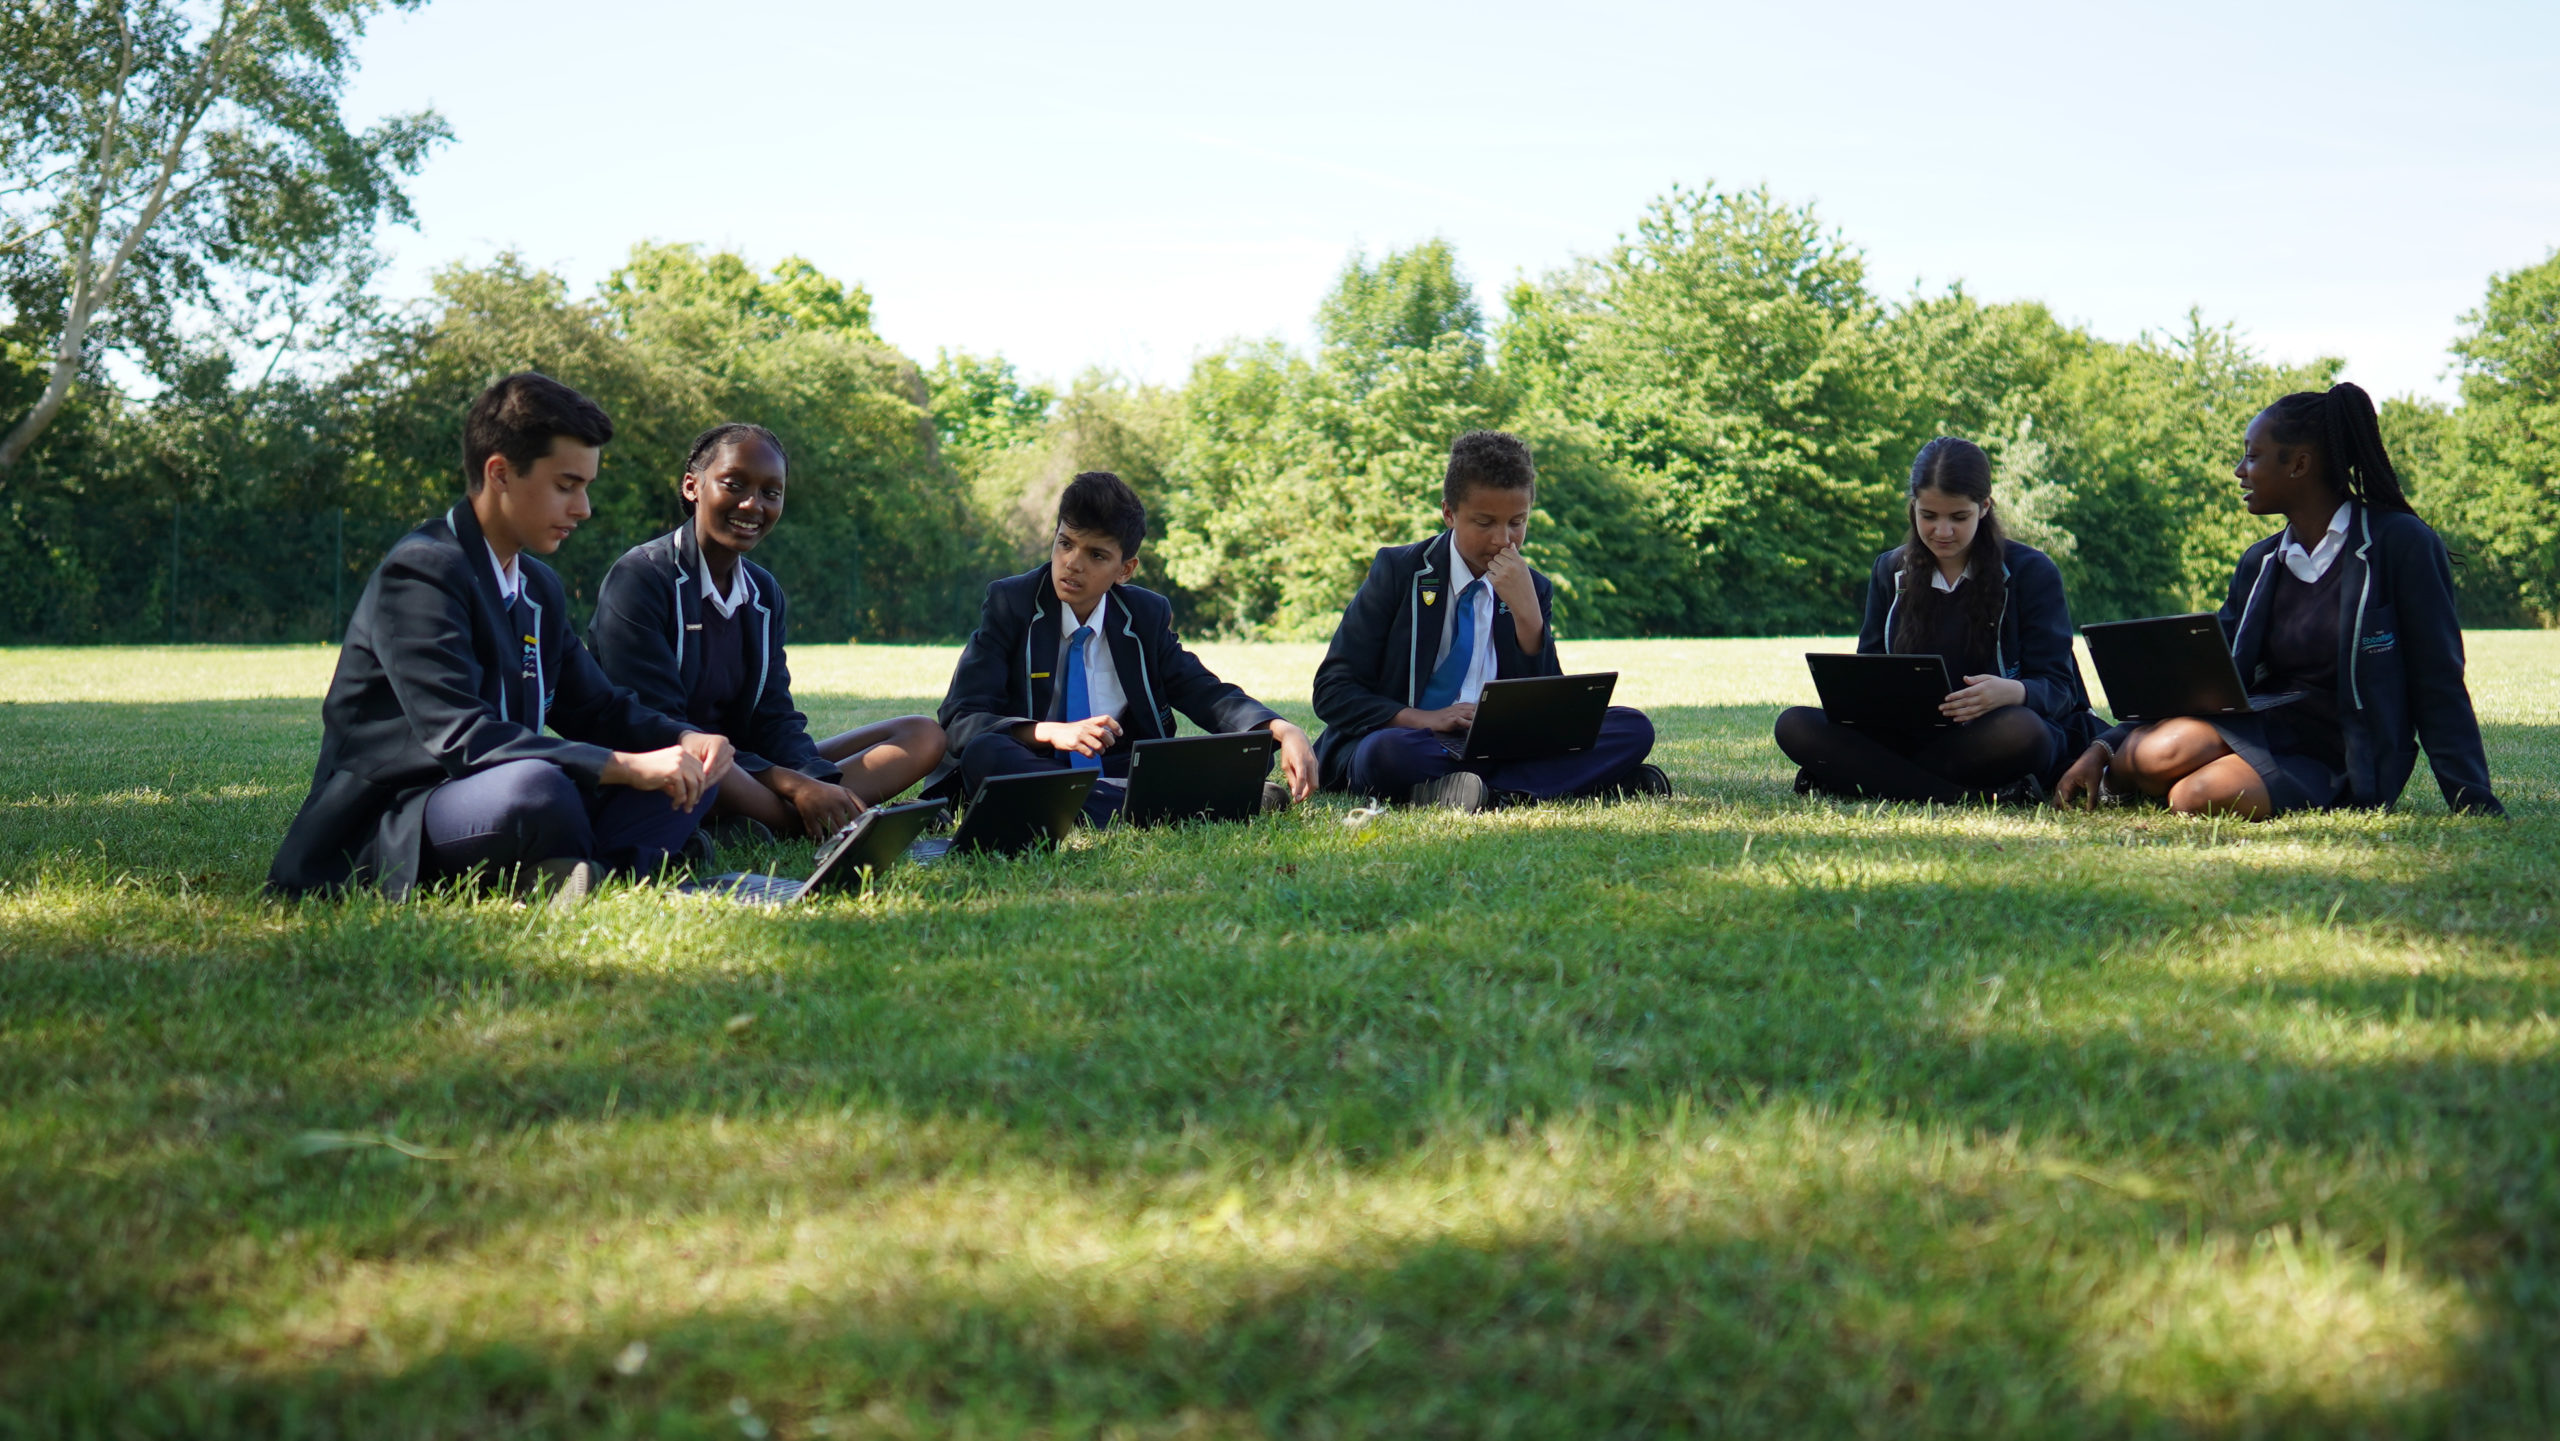 Six Ebbsfleet Academy students are seen sitting on a grass area outside and using their laptop computers.